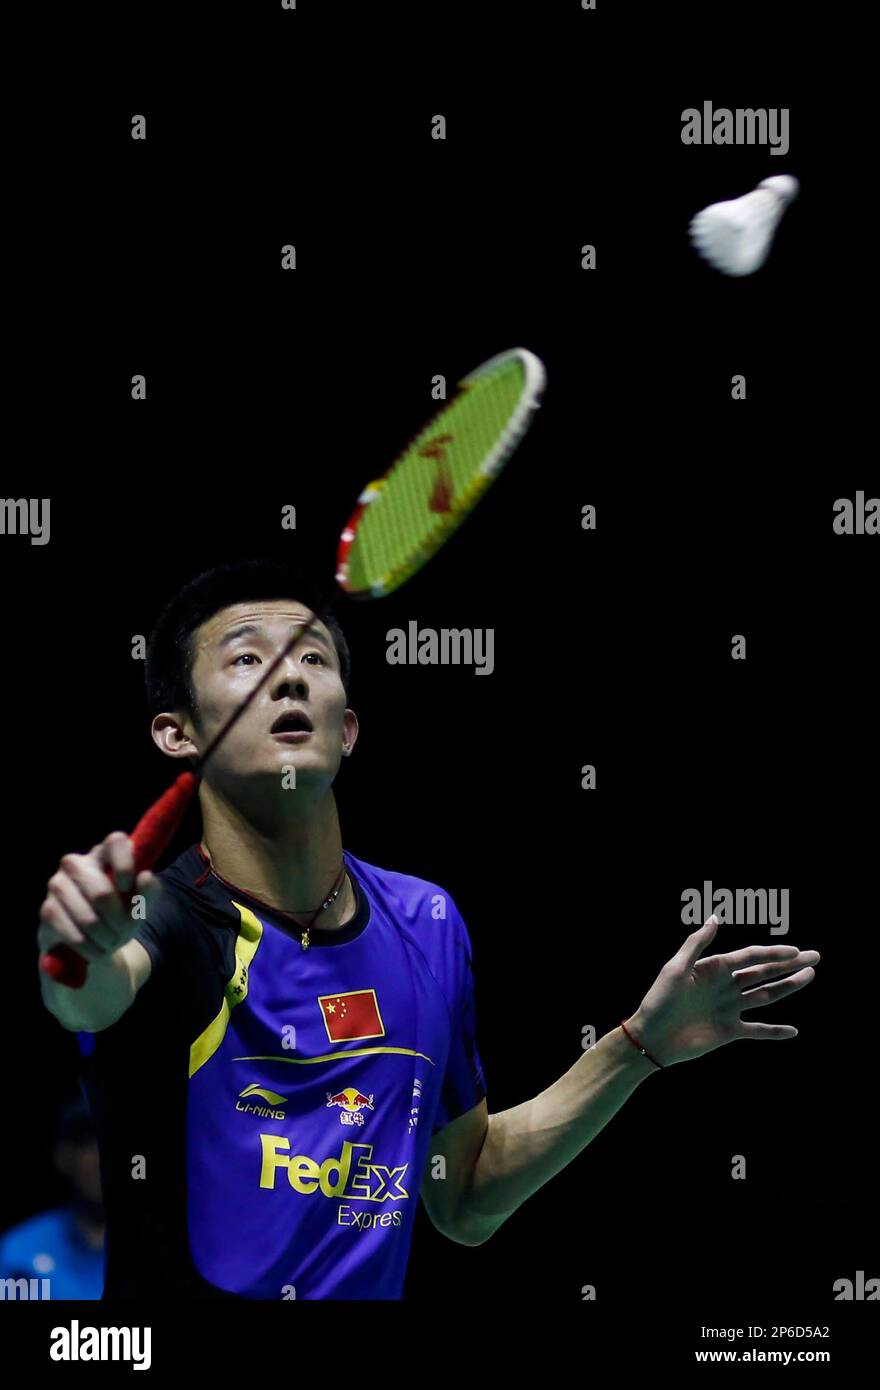 Chinas Chen Long returns a shot during a match against South Koreas Shon Wan Ho at the Thomas Cup badminton championship final in Wuhan in central Chinas Hubei province on Sunday, May